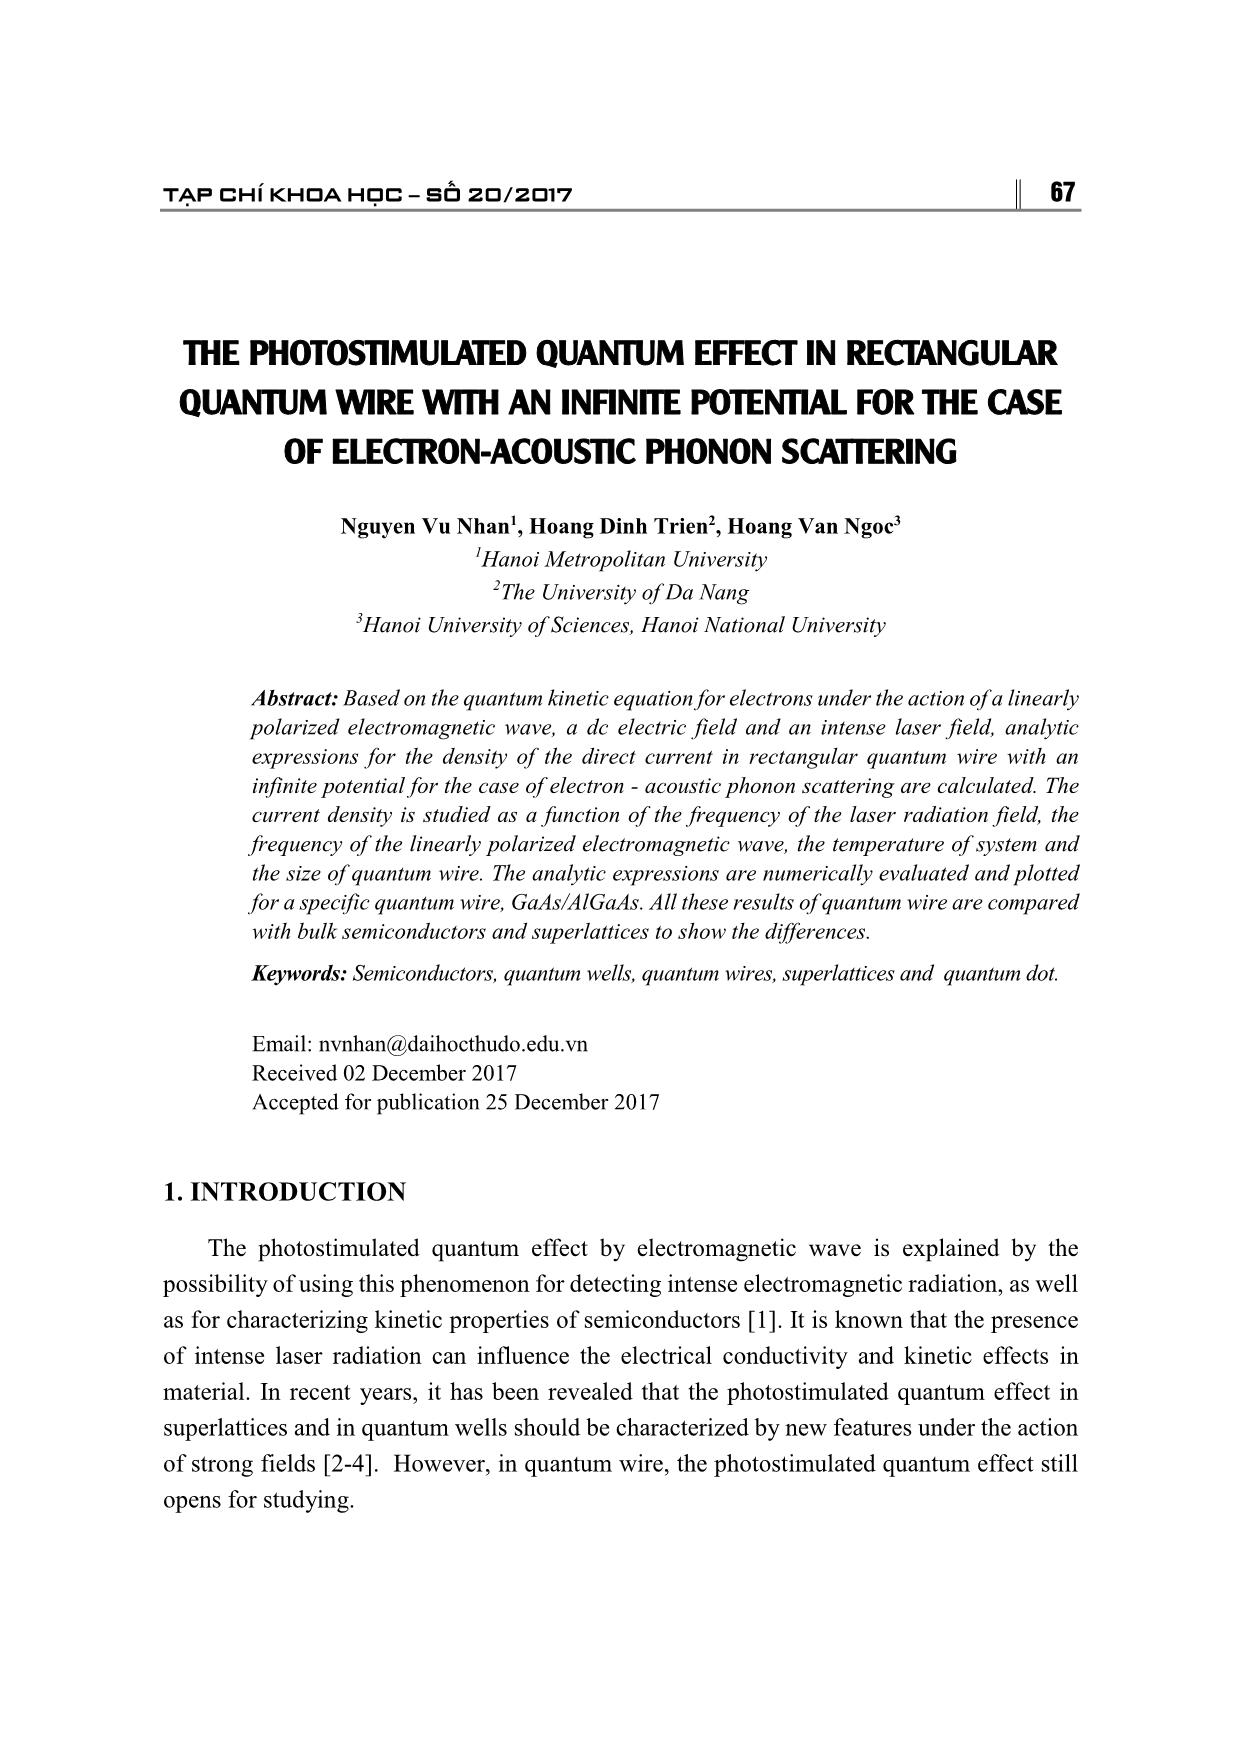 The photostimulated quantum effect in rectangular quantum wire with an infinite potential for the case of electron-acoustic phonon scattering trang 1